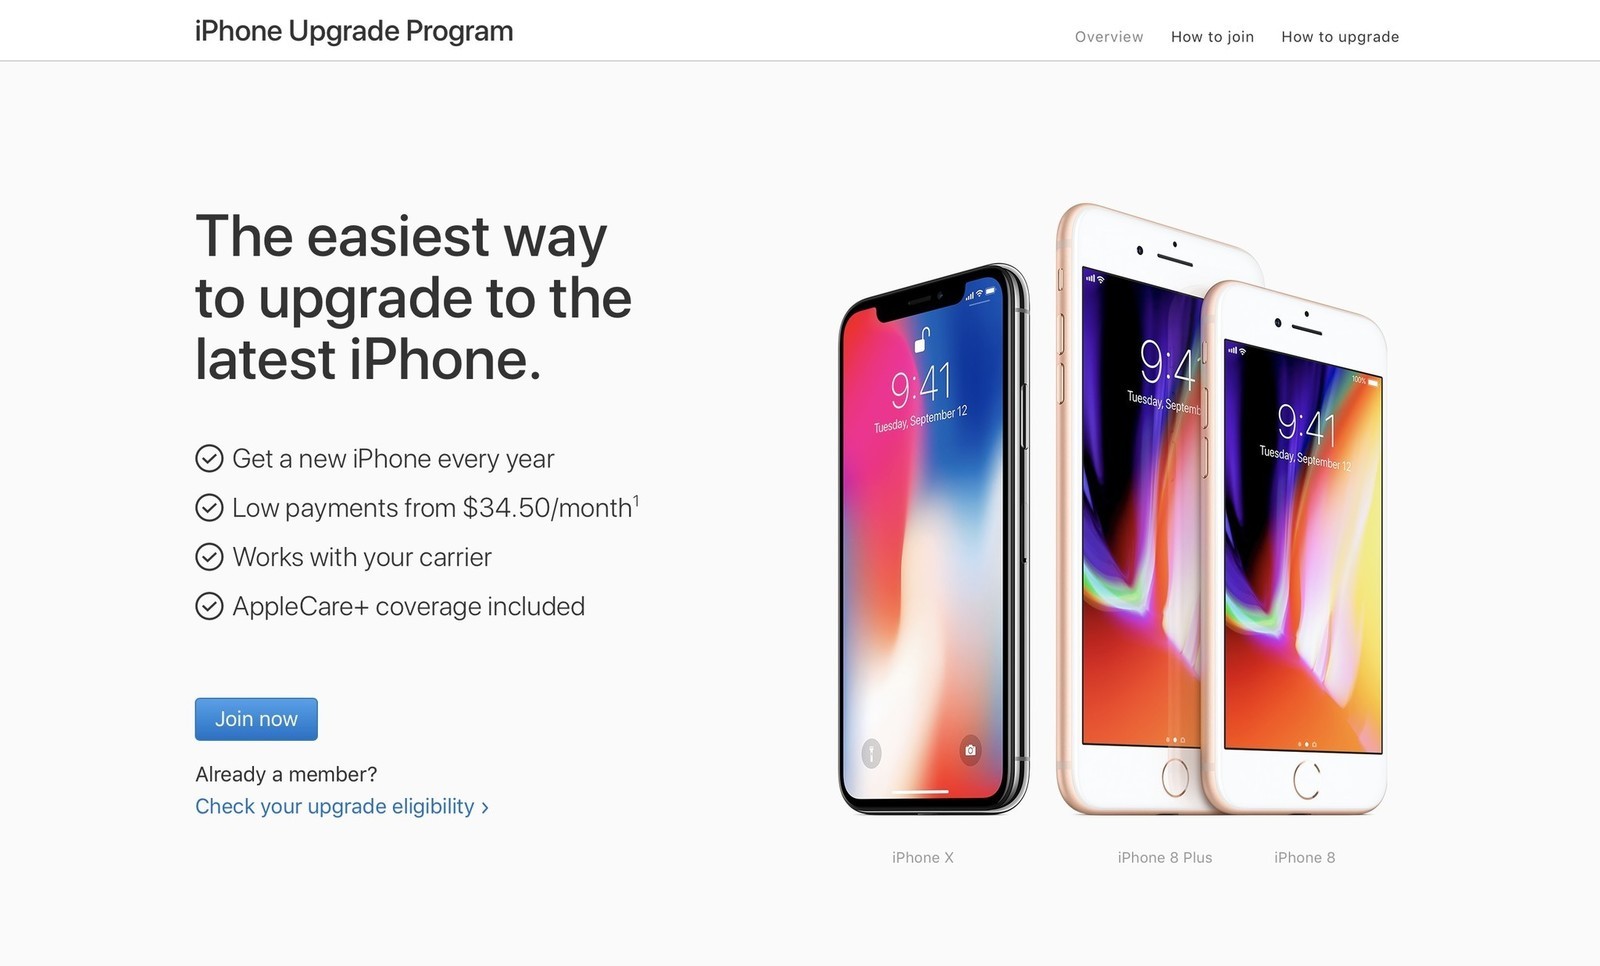 Apple iPhone Upgrade Program: The ultimate guide